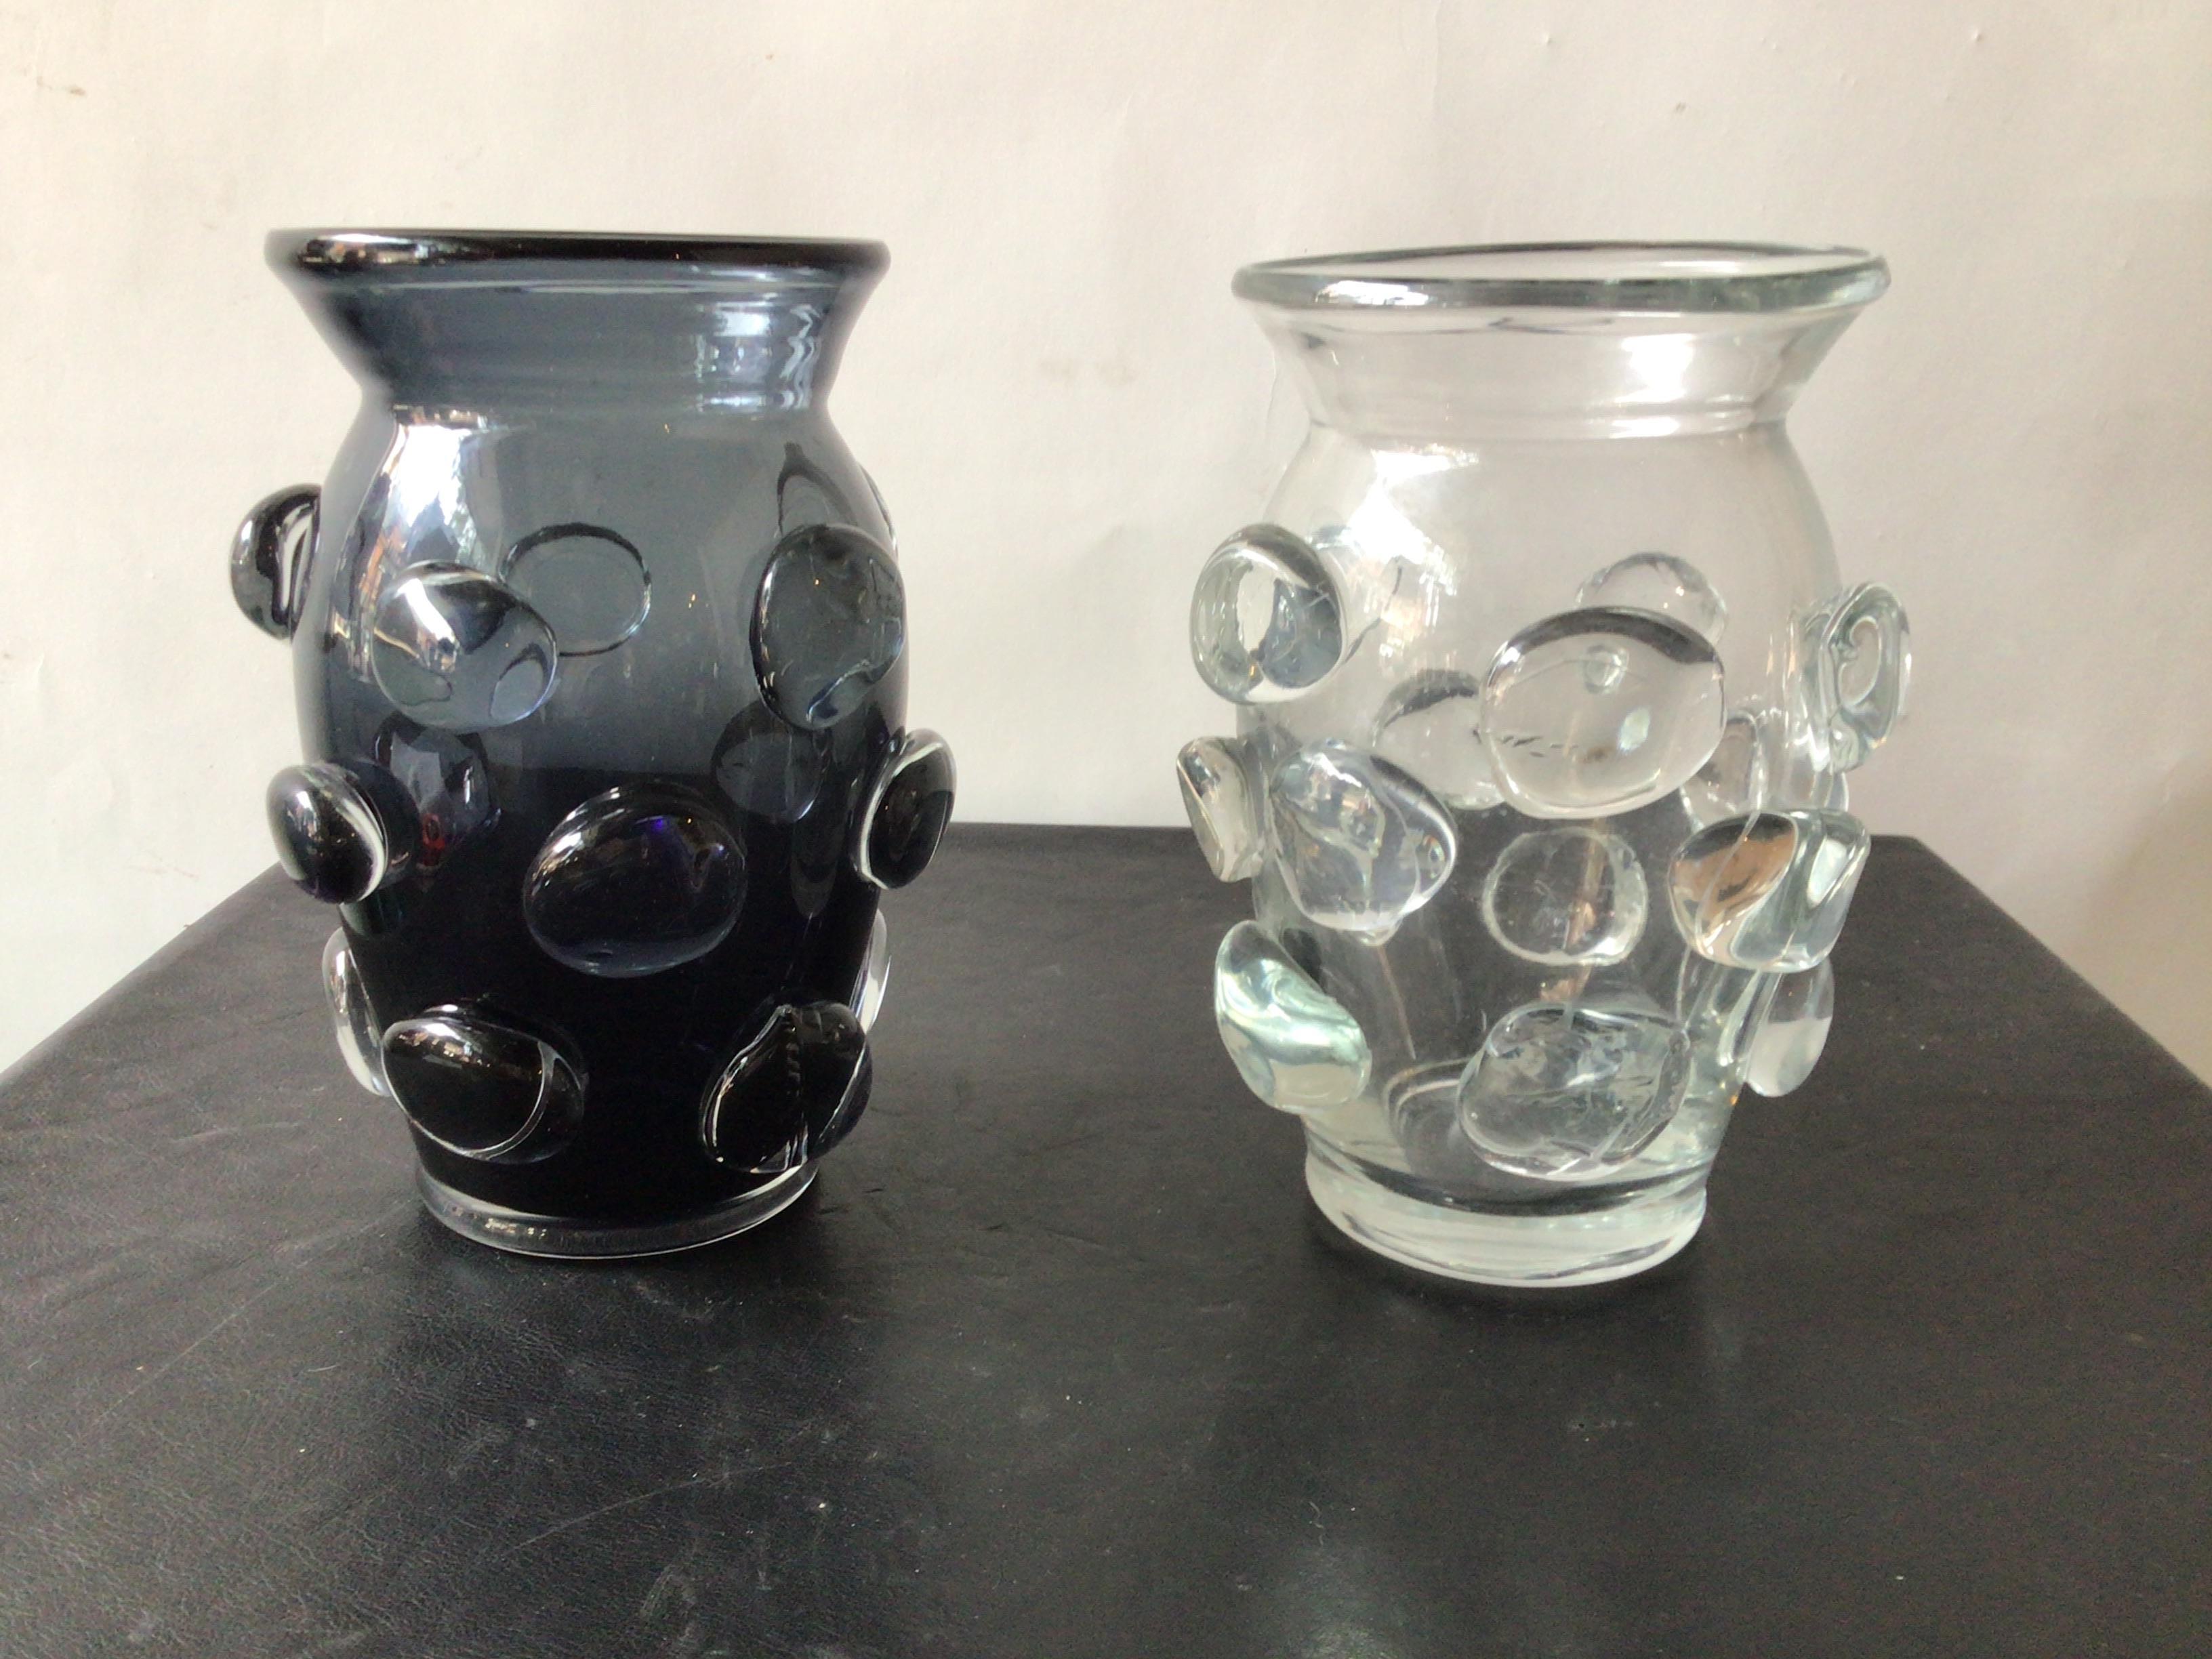 New in box Aerin Abel vase. In black or clear. Retail on the vase is $325.